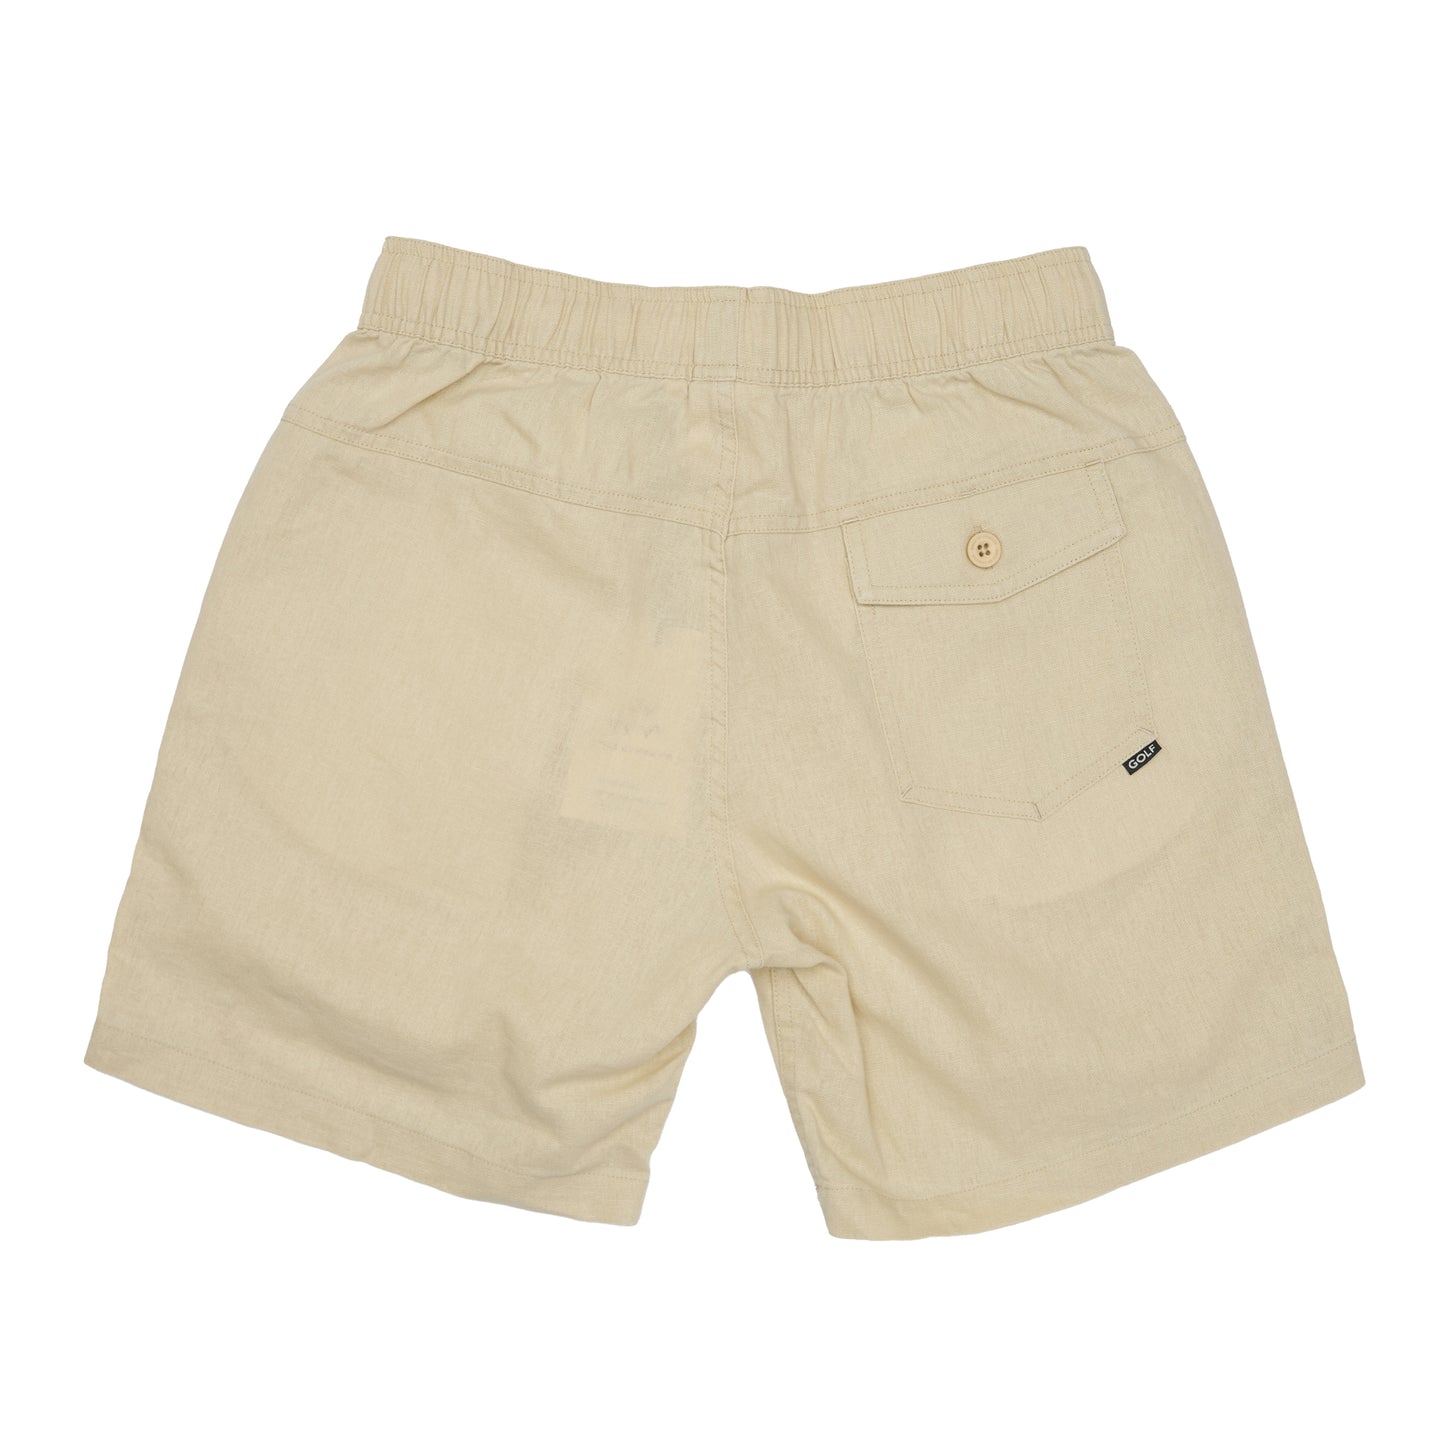 Above The Pins Shorts